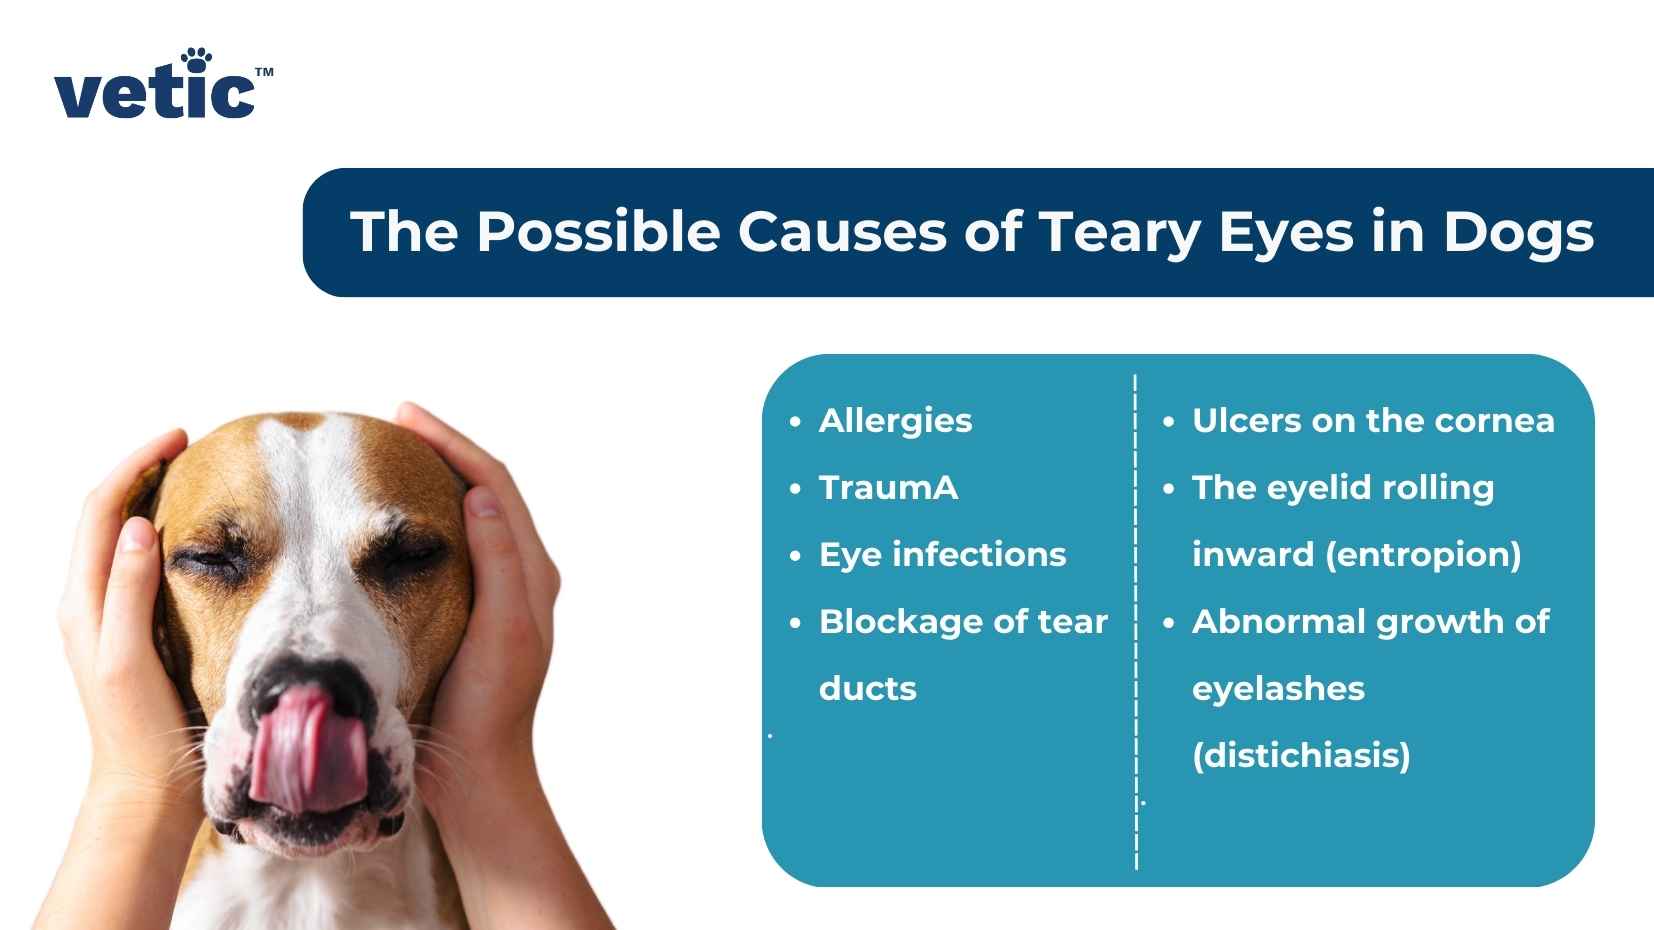 Image titled: The possible causes of teary eyes in dogs - Allergies Trauma Eye infections Blockage of the tear ducts Ulcers on the cornea The eyelid rolling inward (entropion) Abnormal growth of eyelashes (distichiasis)